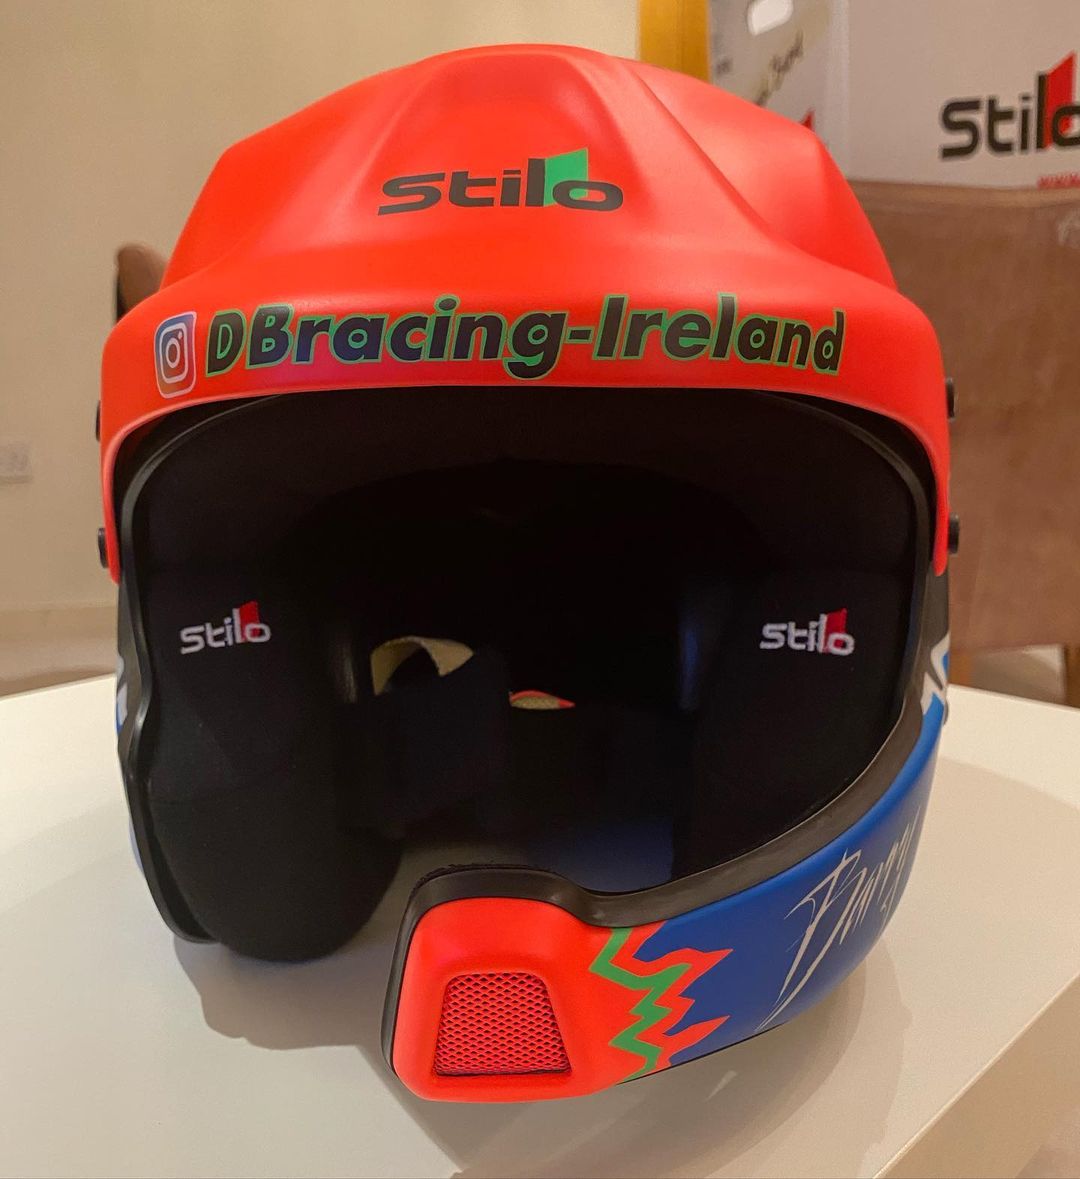 How to make your Stilo Helmet stand out - by DB Racing!